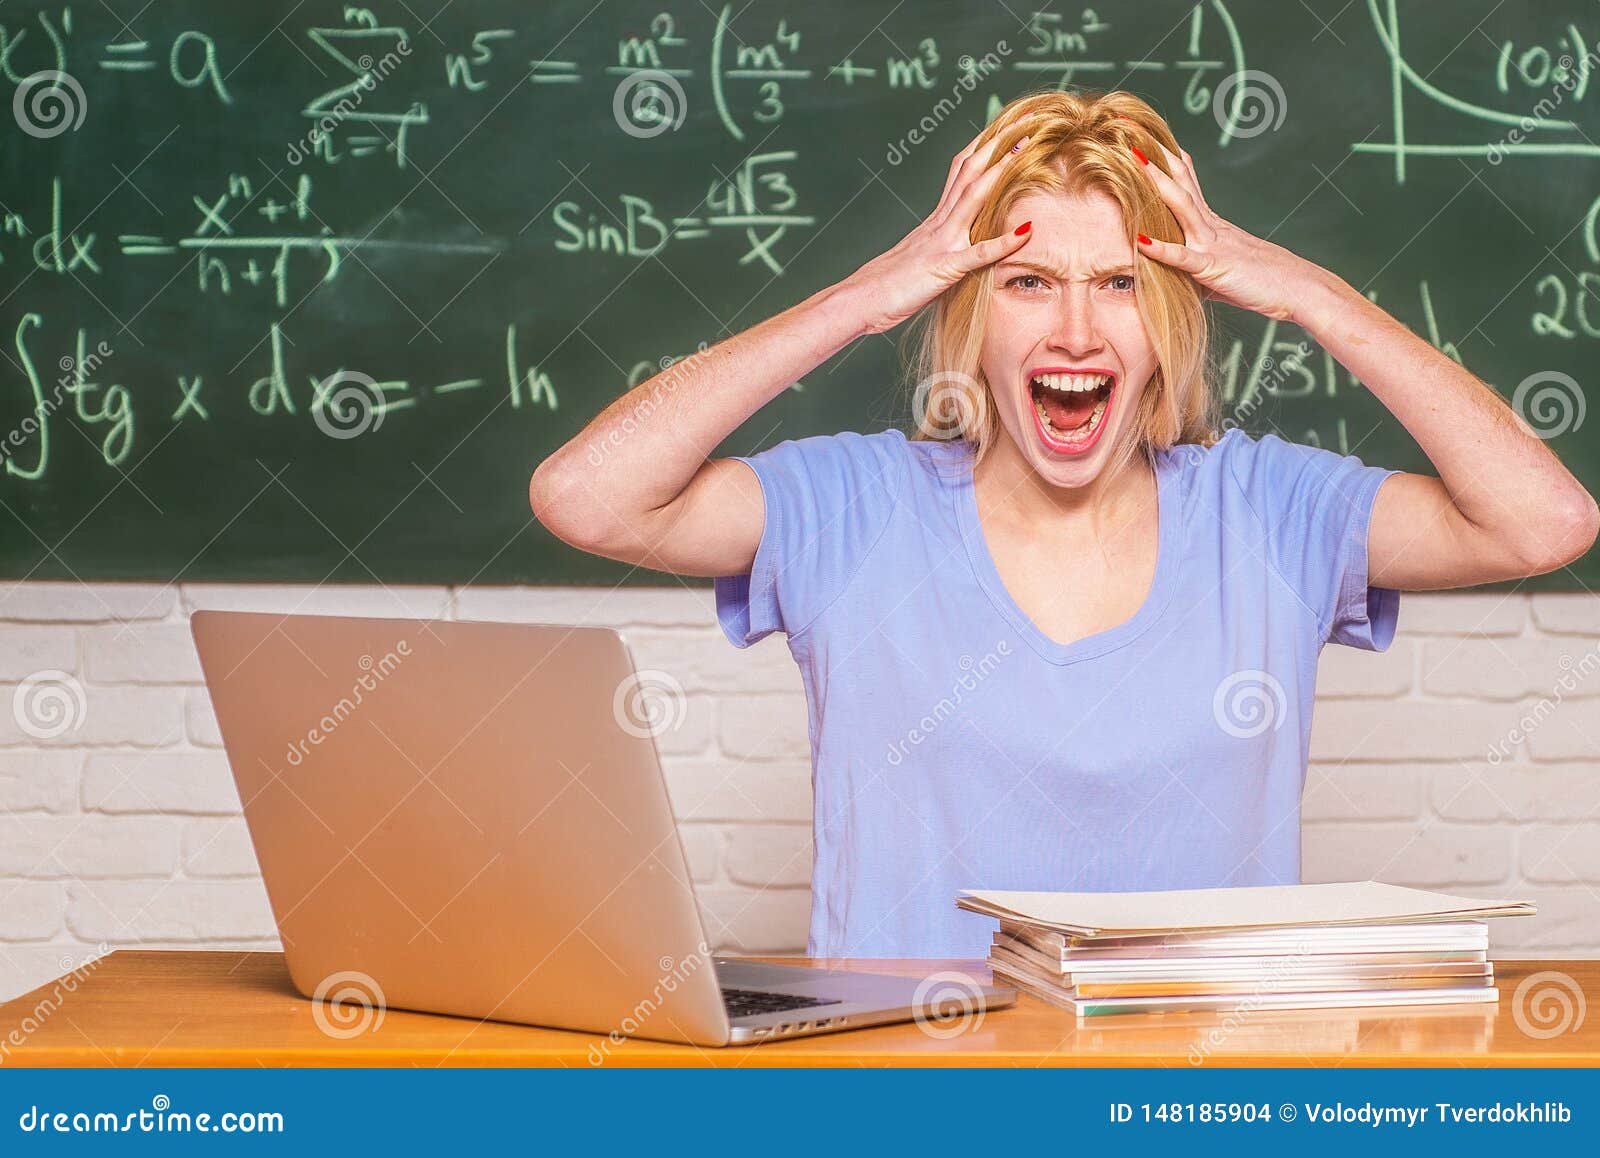 Tired Student. Teachers Day. Young Female Student Ready To Write Exam  Testing Stock Photo - Image of experience, educated: 148185904